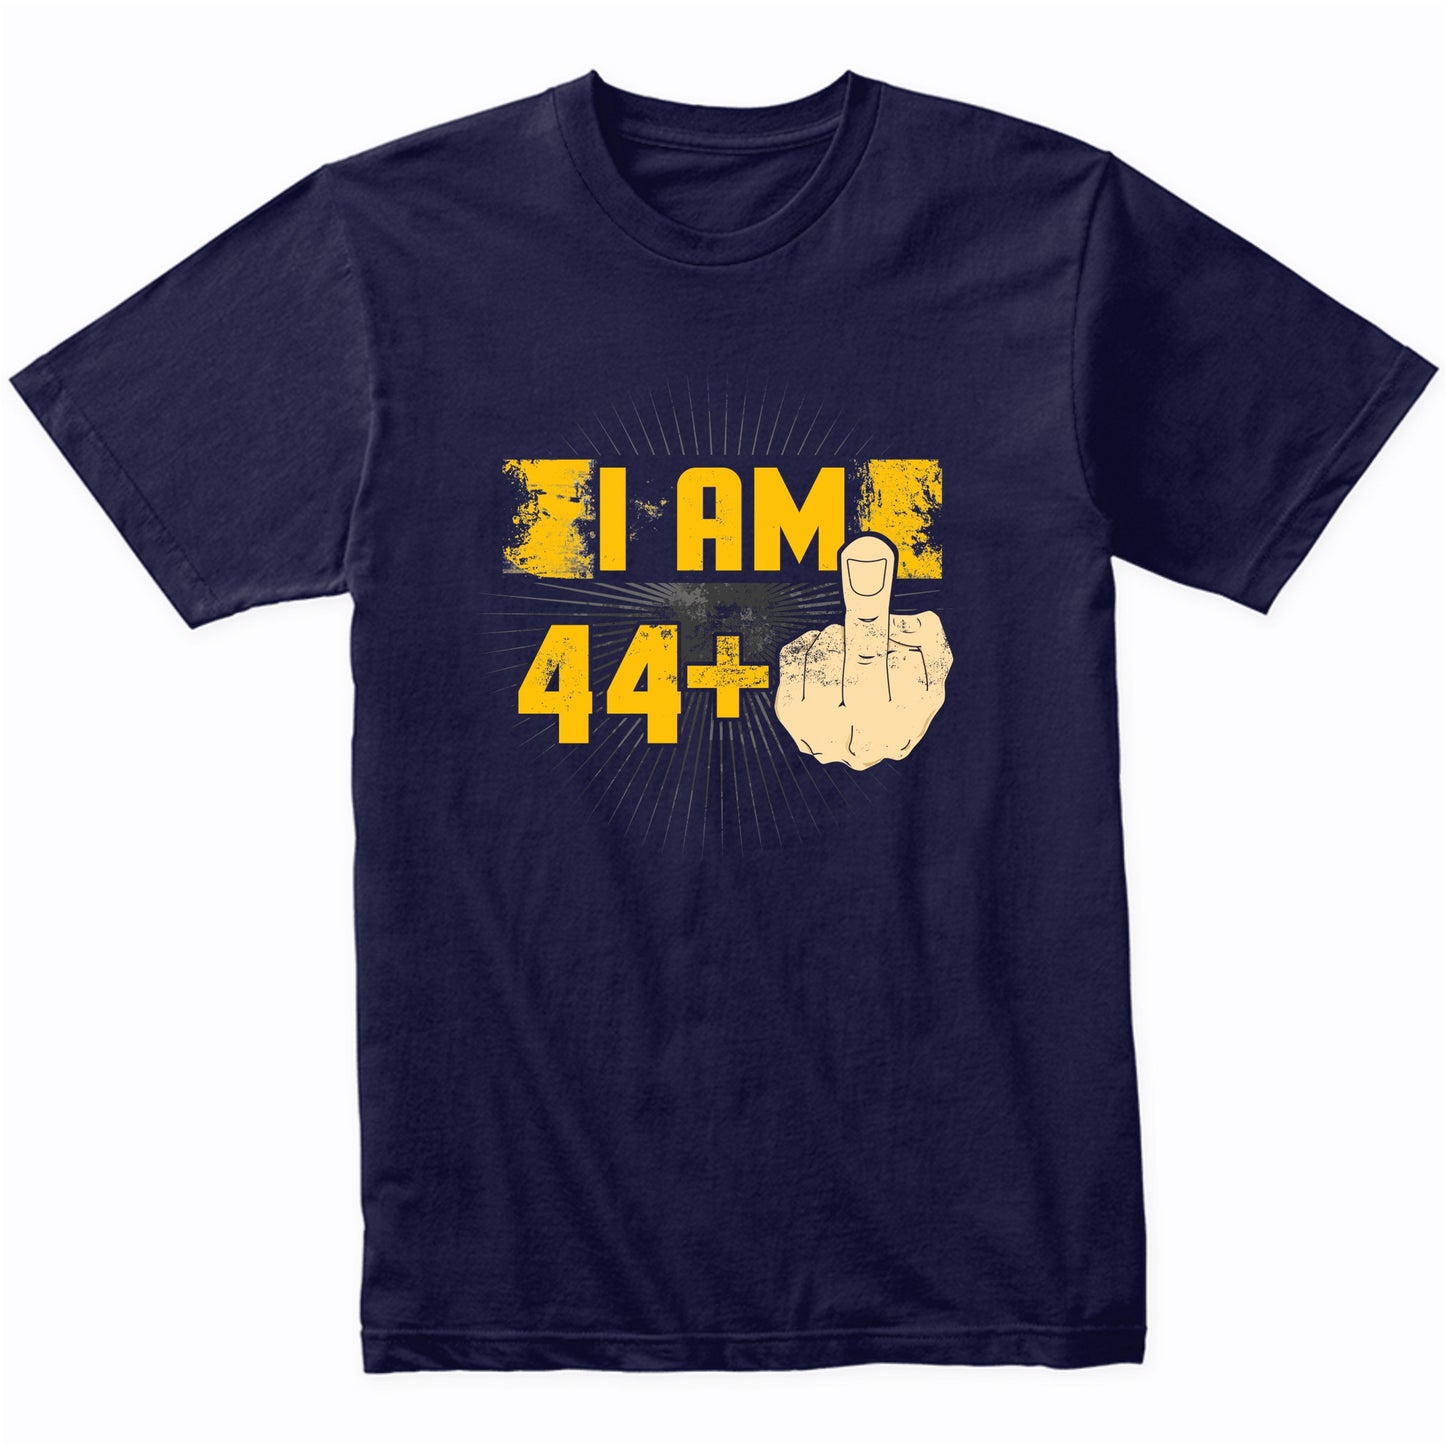 45th Birthday Shirt For Men - I Am 44 Plus Middle Finger 45 Years Old T-Shirt